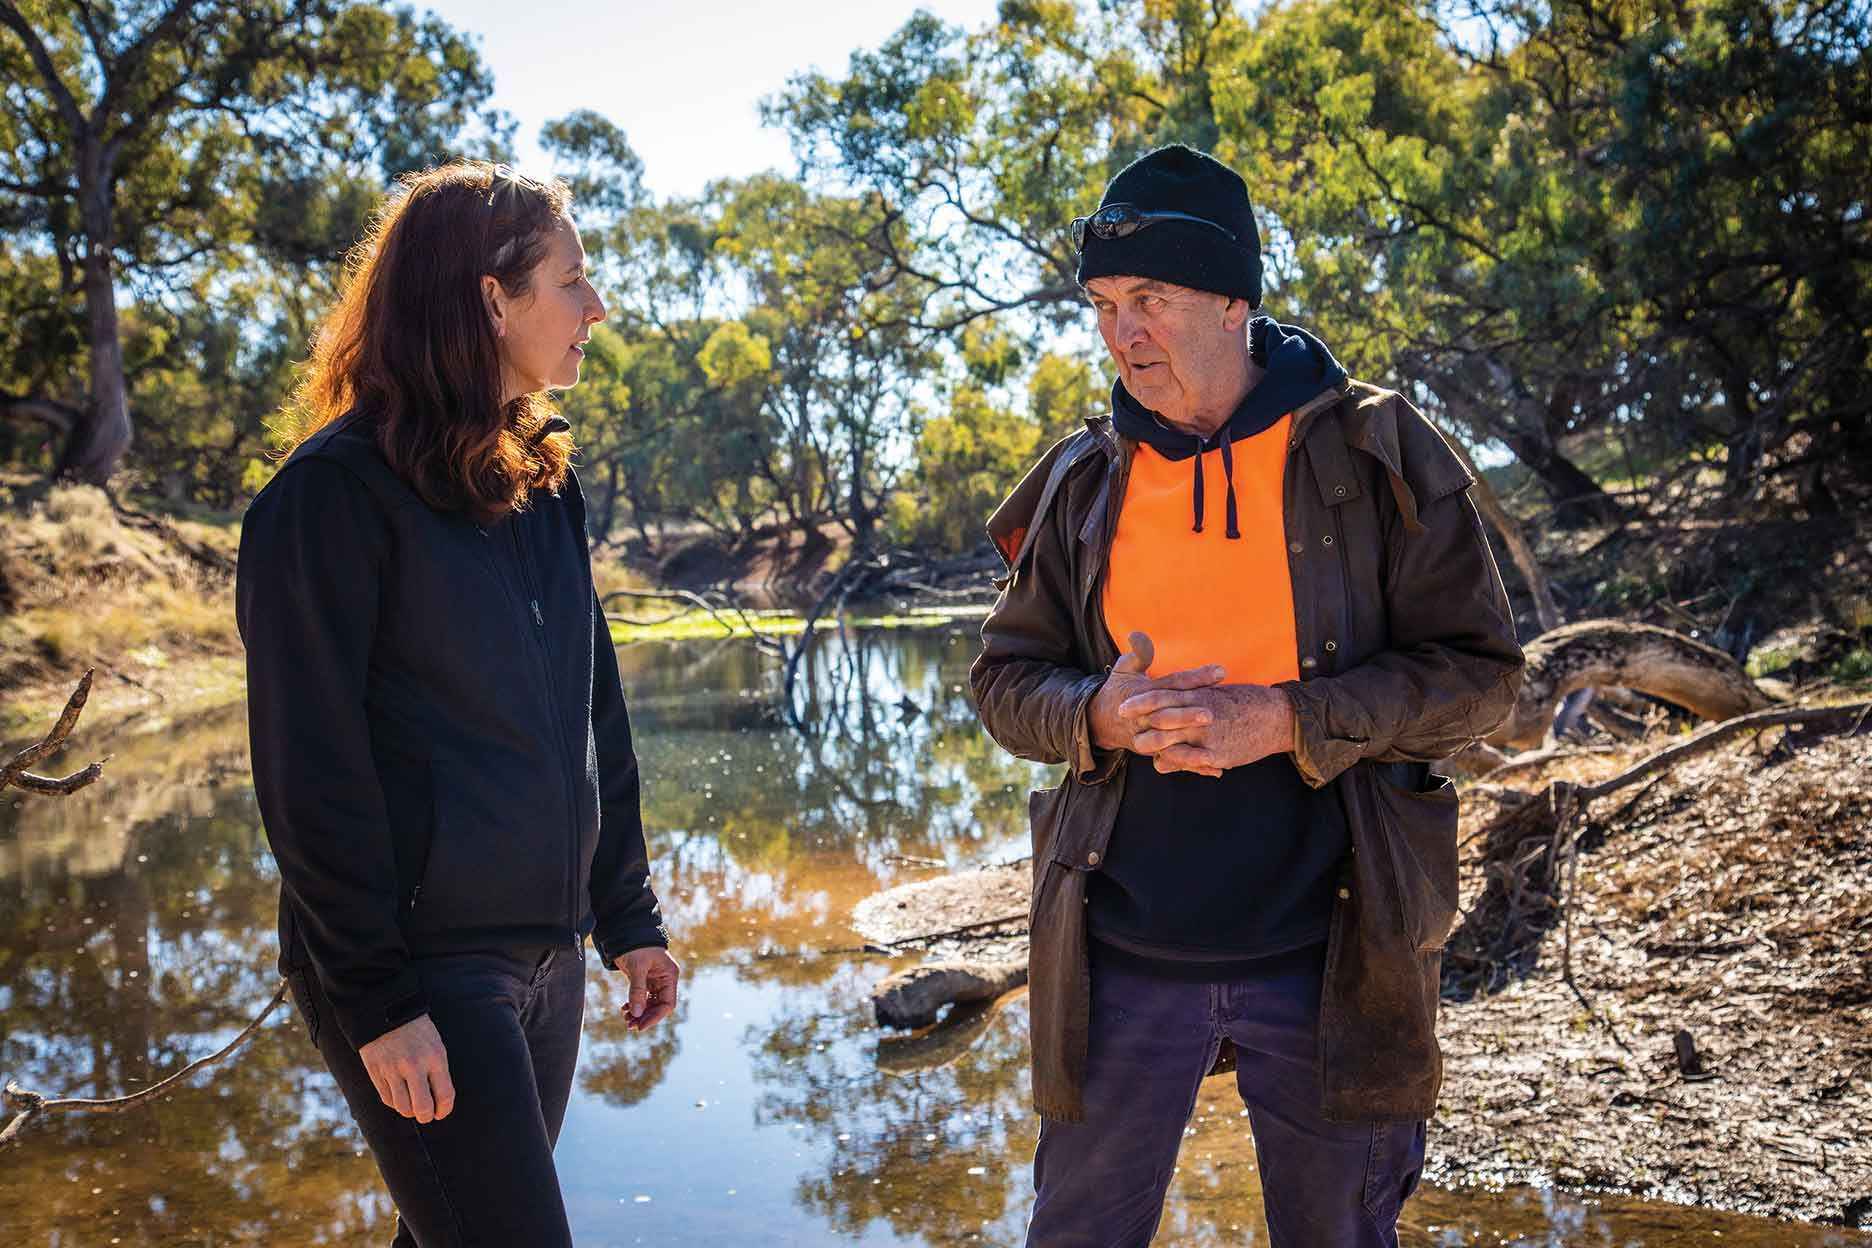 Marissa Shean with Donald Cooper, President of the Nullawil Landcare Group, surveying the <br />
environmental water allocation at Uttiwillock Wetland in Nullawil 2021. <br />
